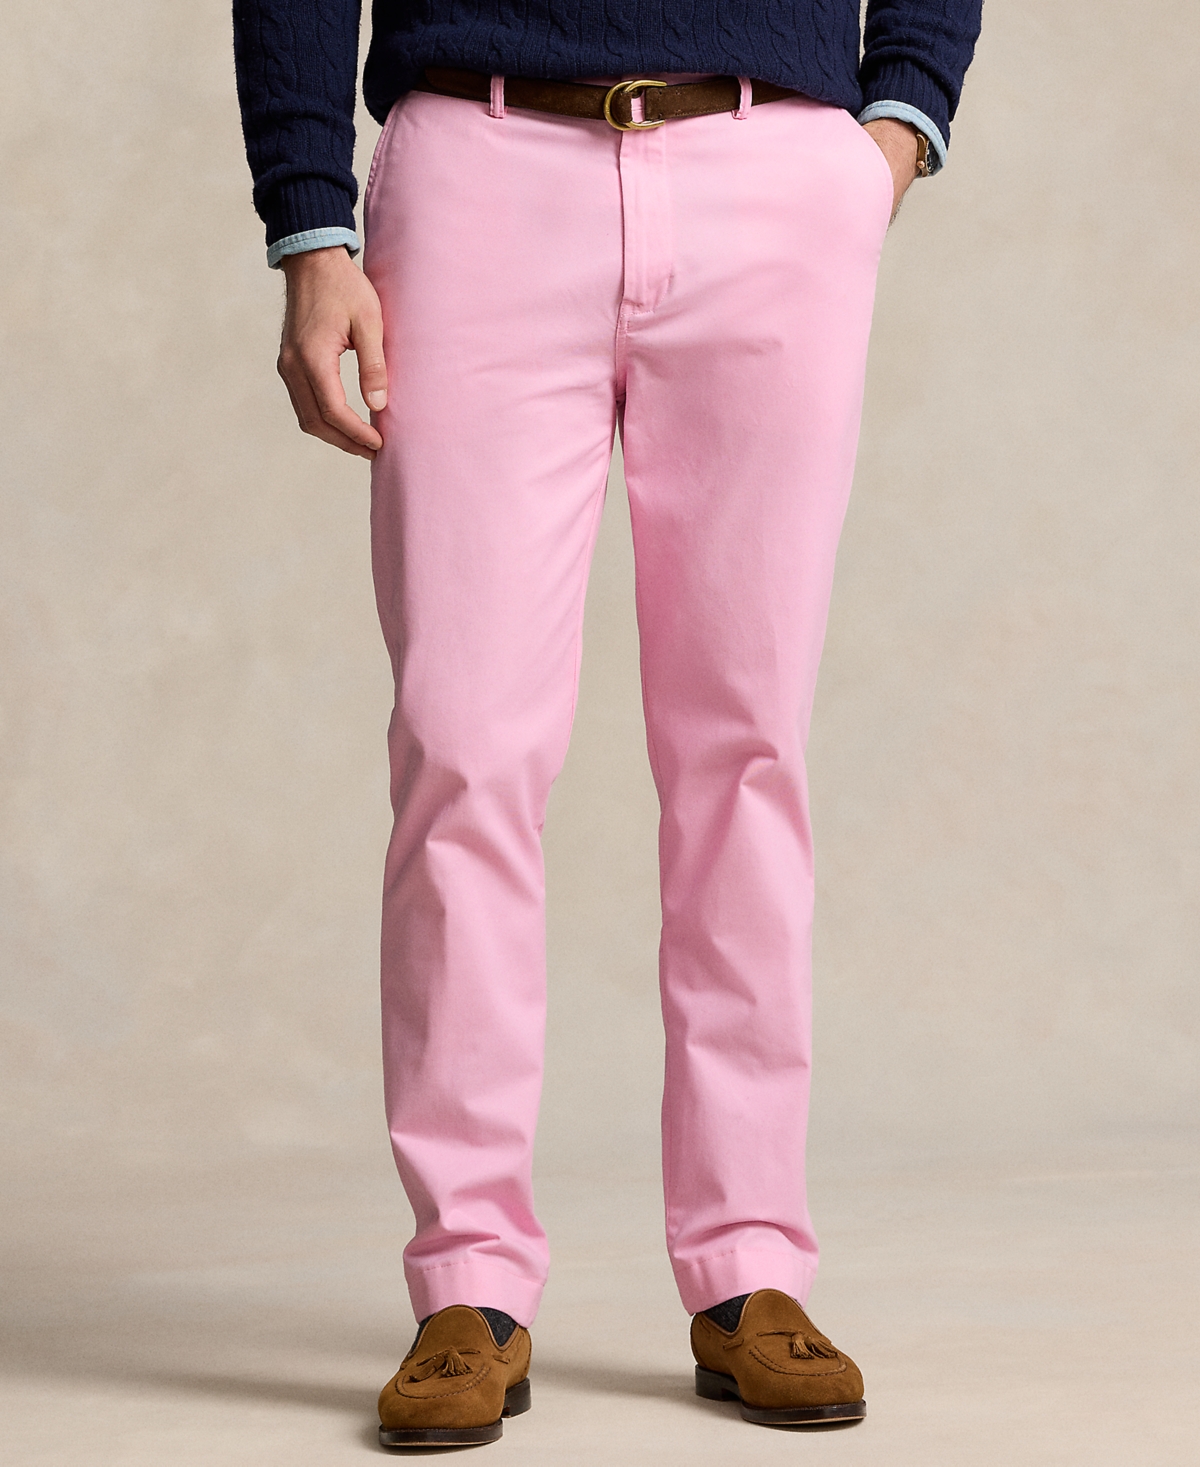 Polo Ralph Lauren Men's Big & Tall Stretch Straight Fit Chino In Carmel Pink